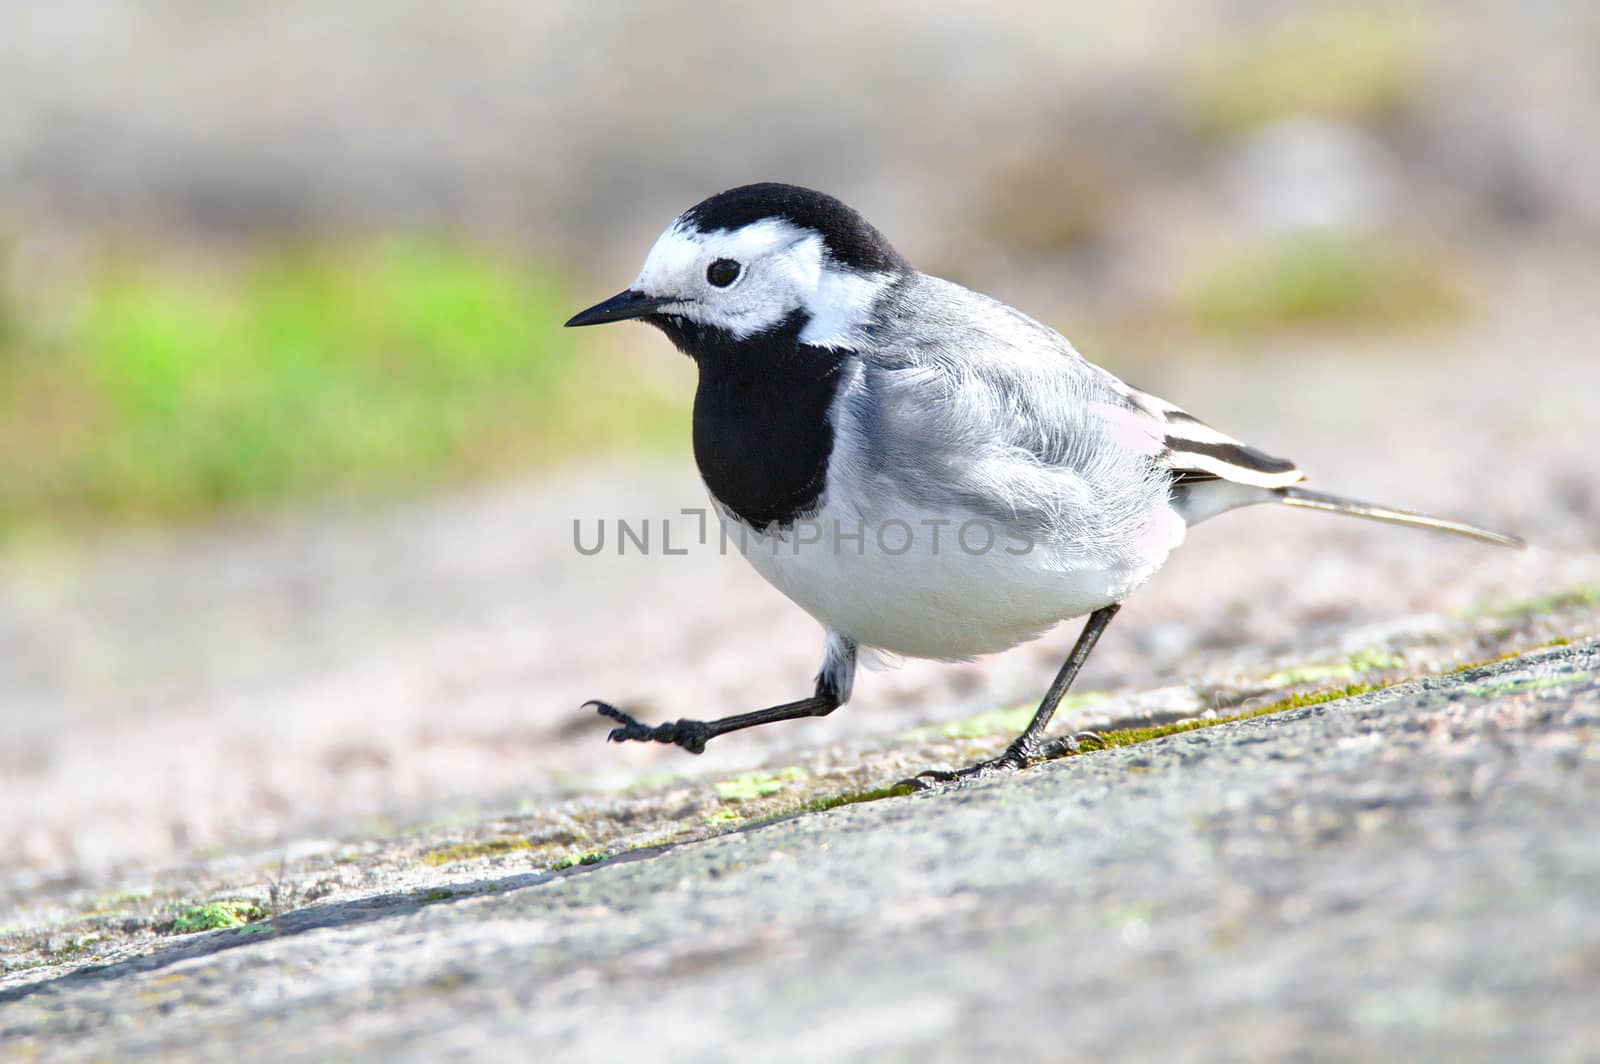 White wagtail walking around on first sunny day.